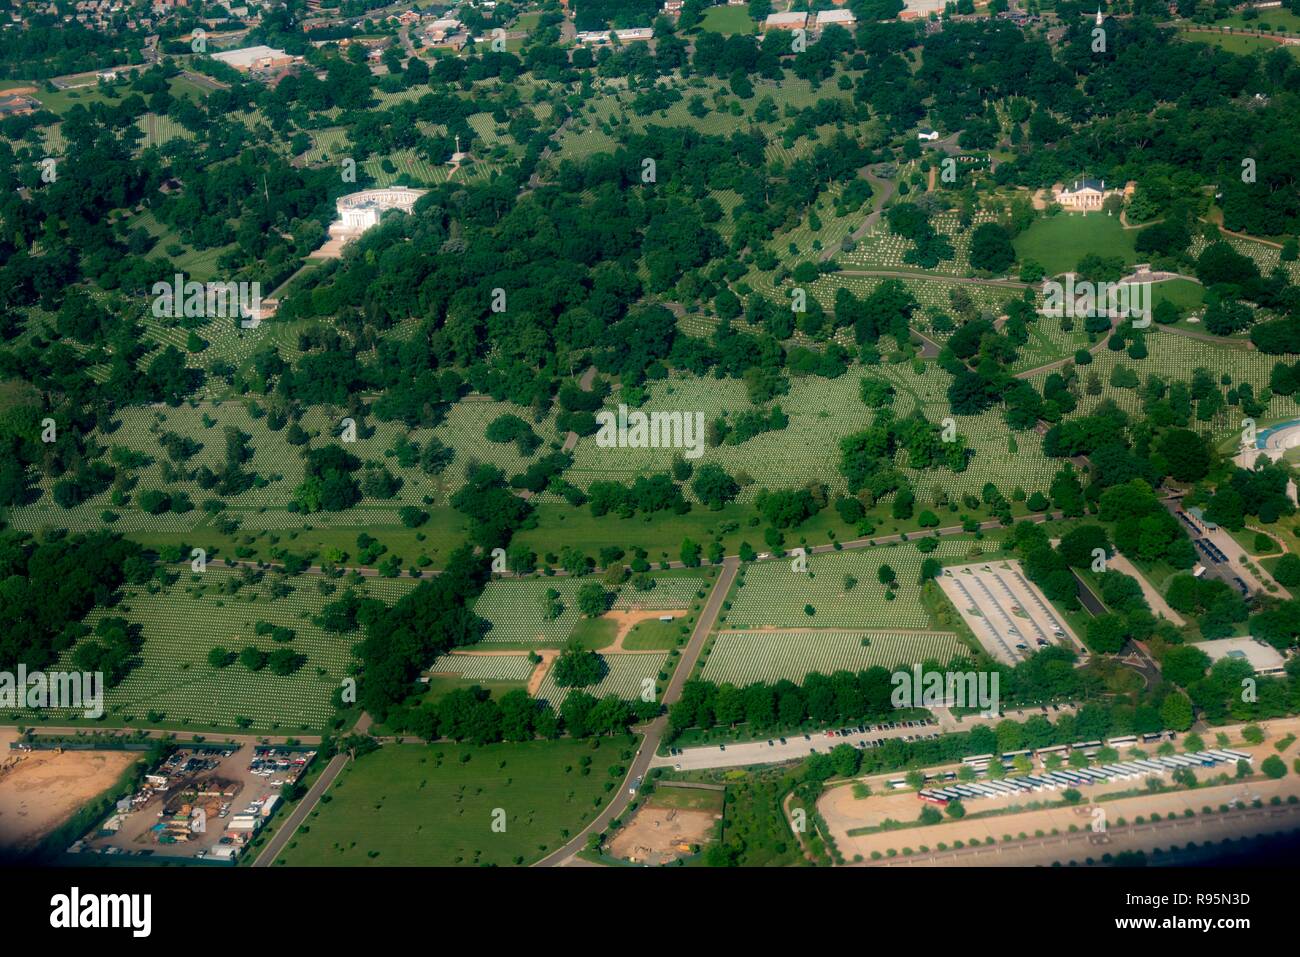 Arlington National Cemetery seen from the air Stock Photo